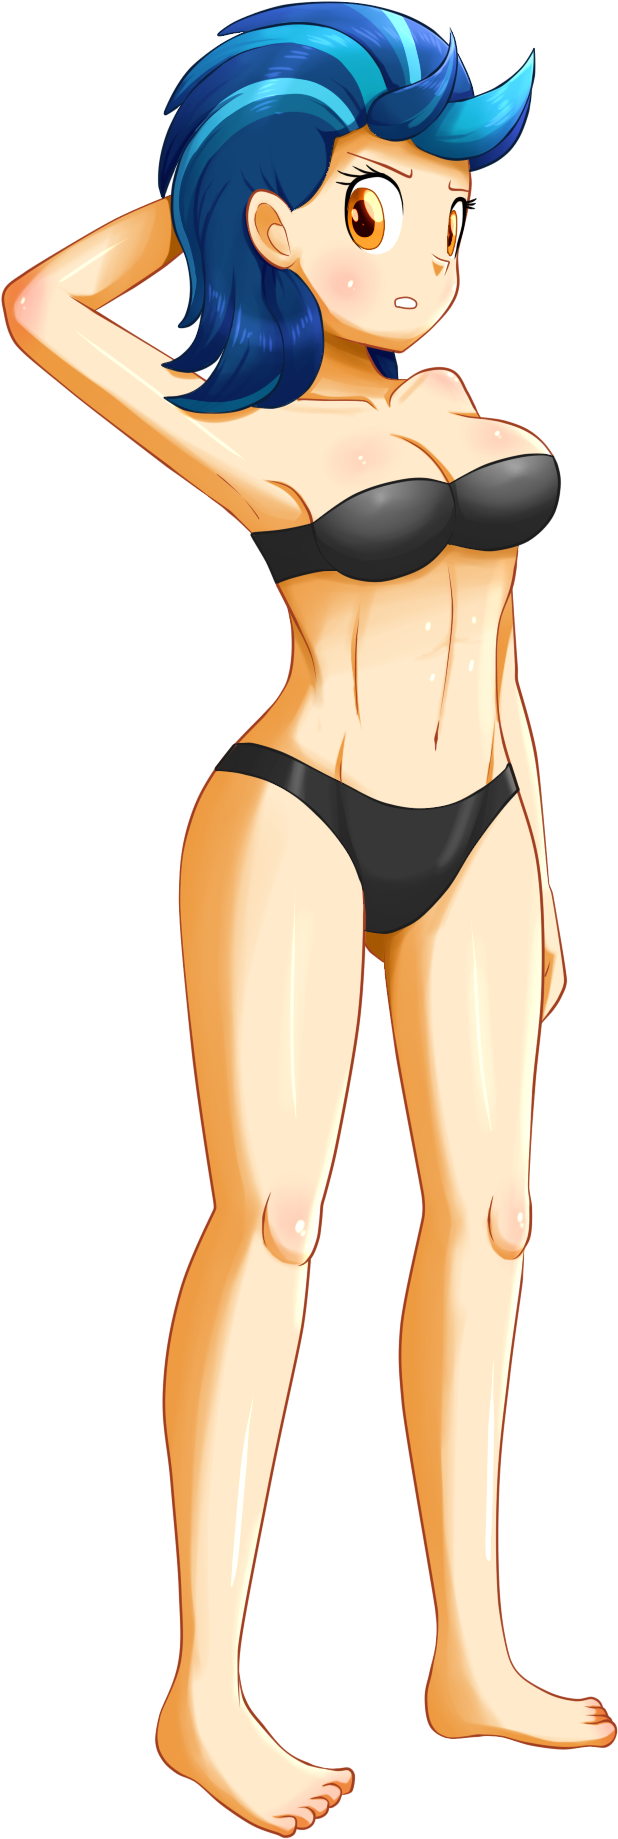 The Butch X, Art Pack - Lingerie Top (670x1930)